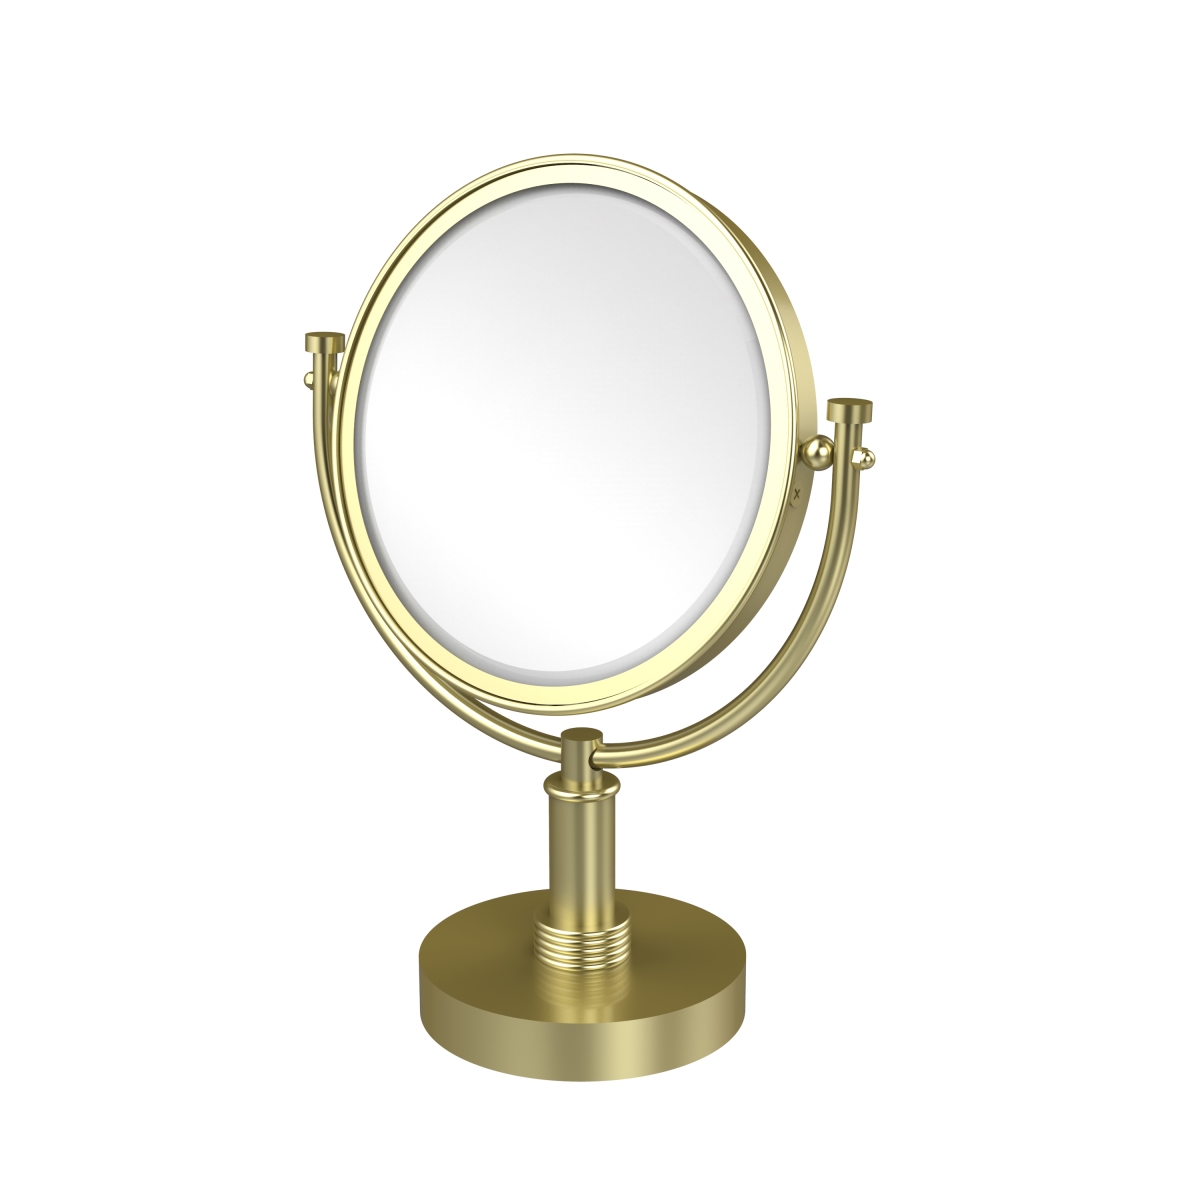 Dm-4g-2x-sbr Grooved Ring Style 8 In. Vanity Top Make-up Mirror 2x Magnification, Satin Brass